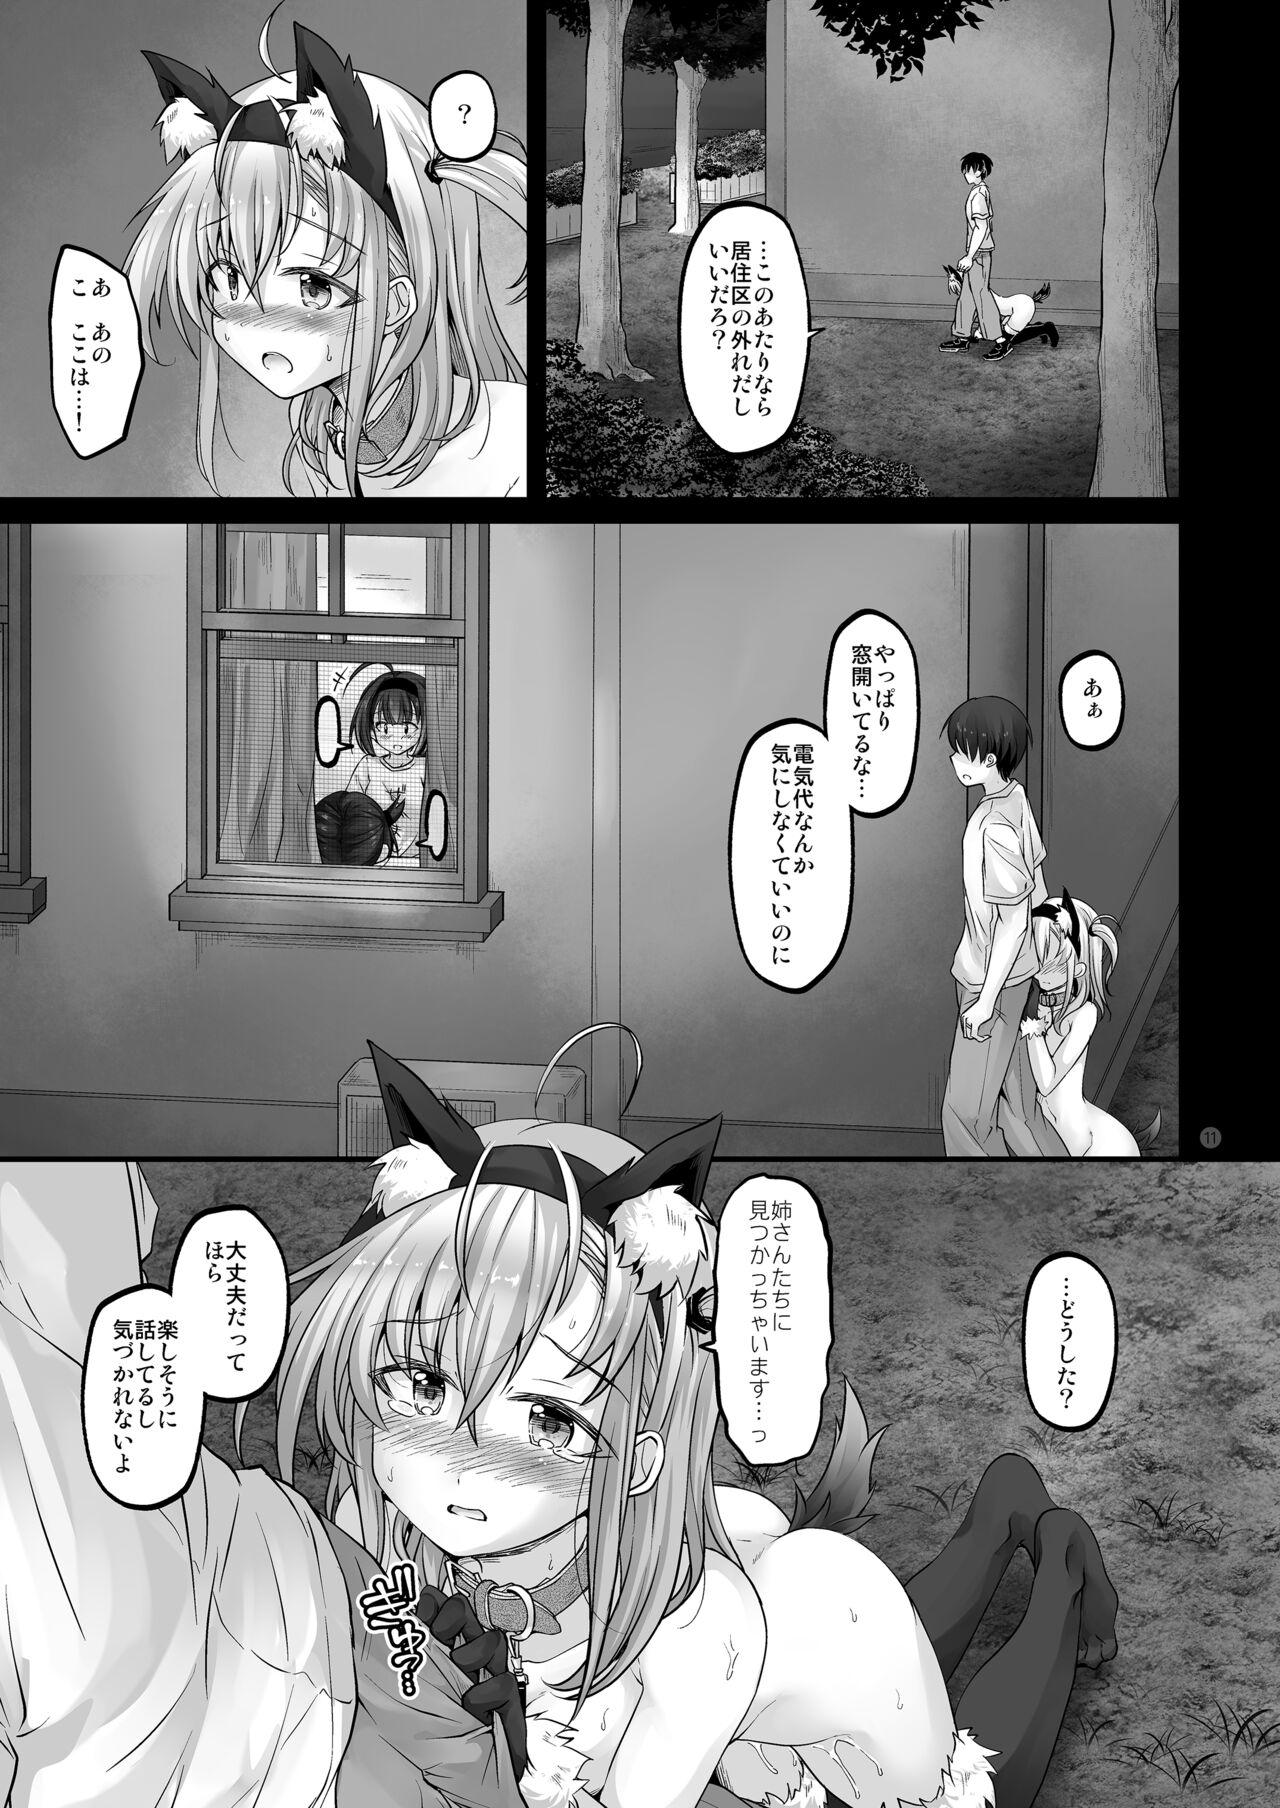 Moan Howling Moon - Kantai collection Teenxxx - Page 11